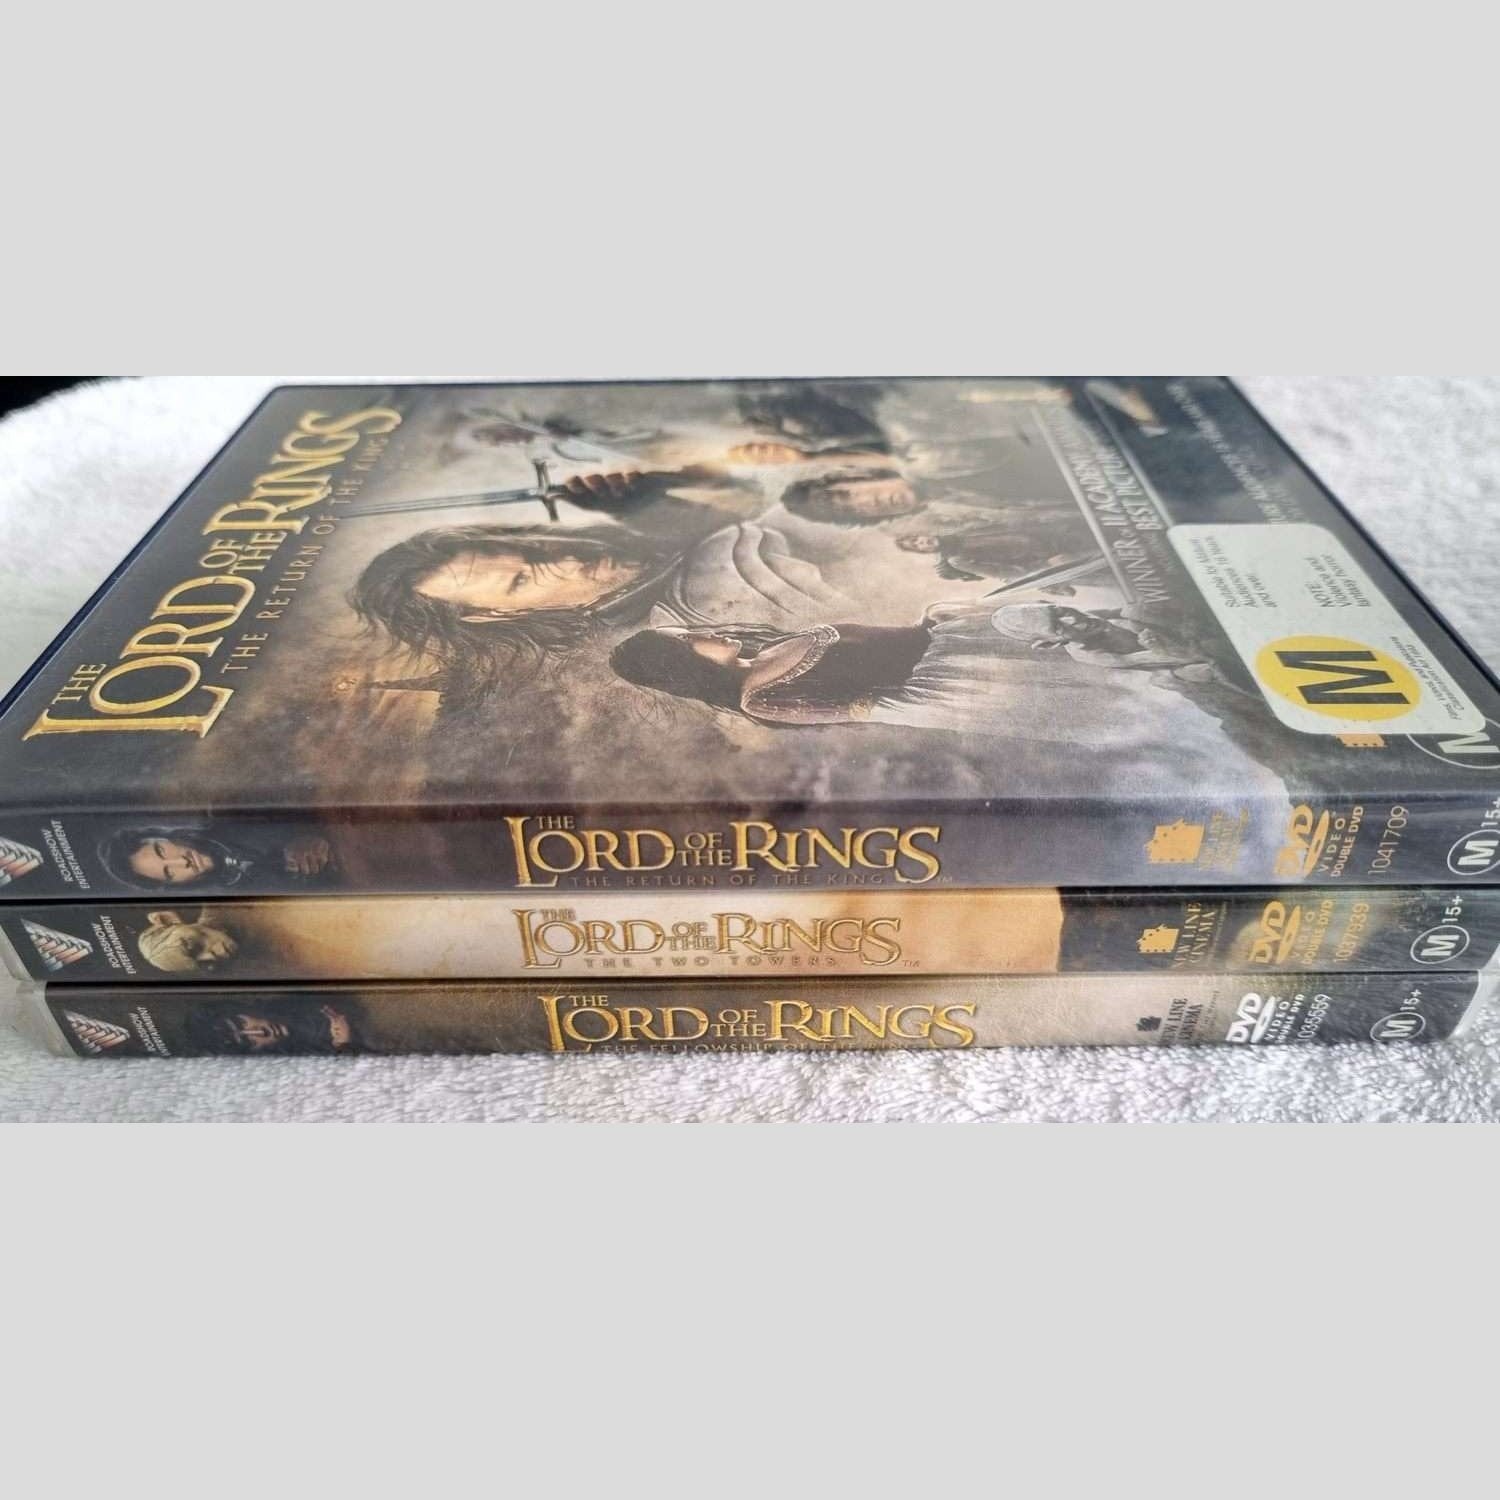 Lord of the Rings Trilogy 6 Discs